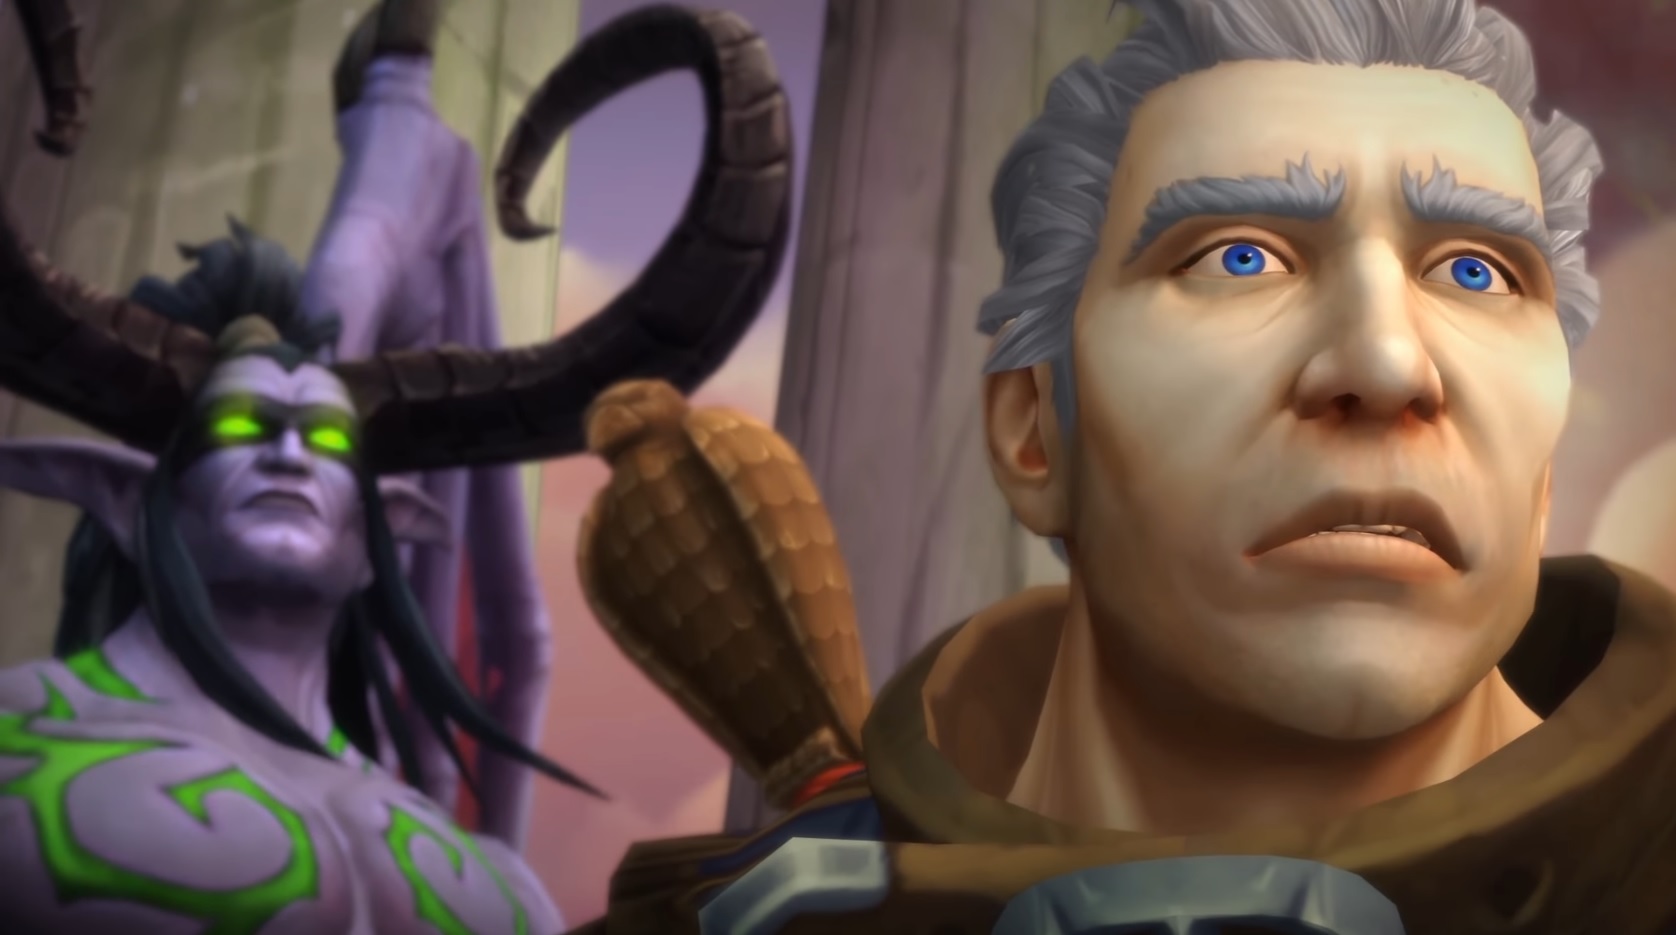 WoW Tomb of Sargeras Cinematic Khadgar oh lol